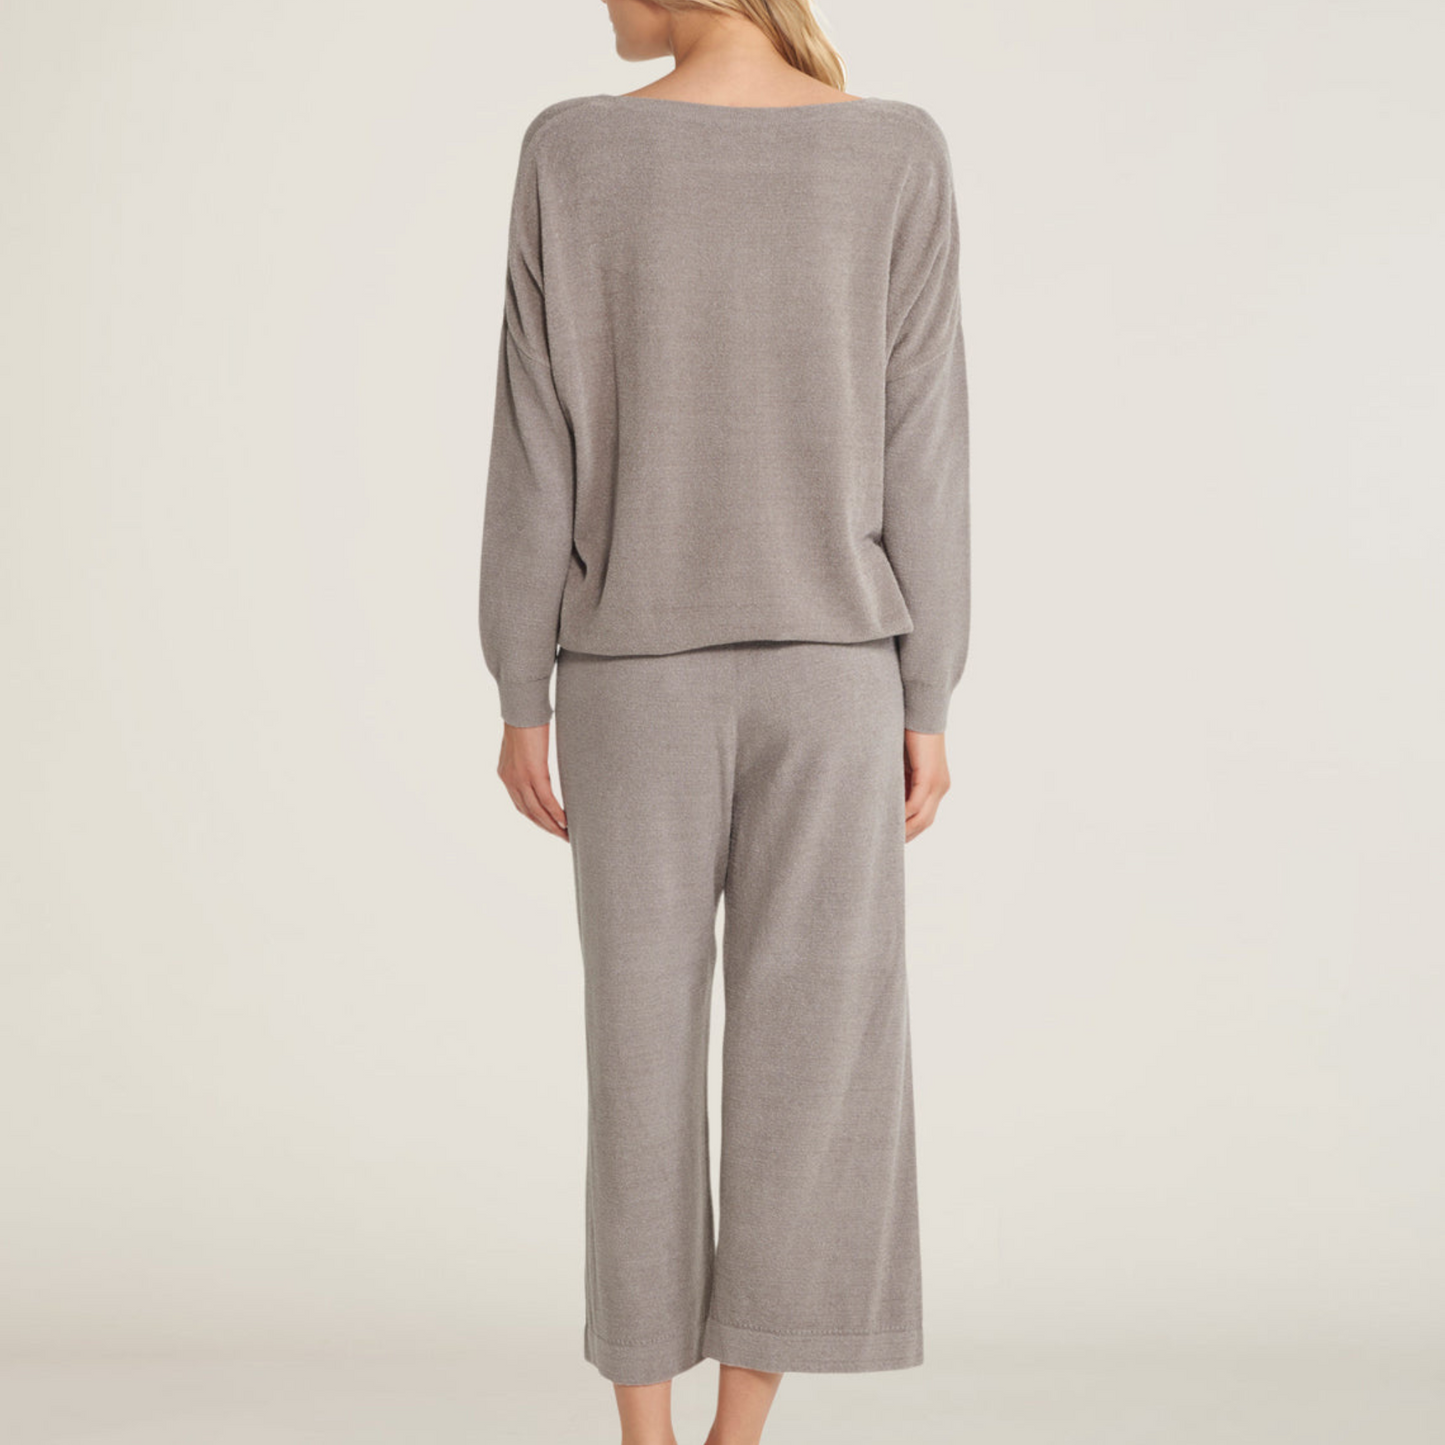 CozyChic Ultra Lite Slouchy Pullover